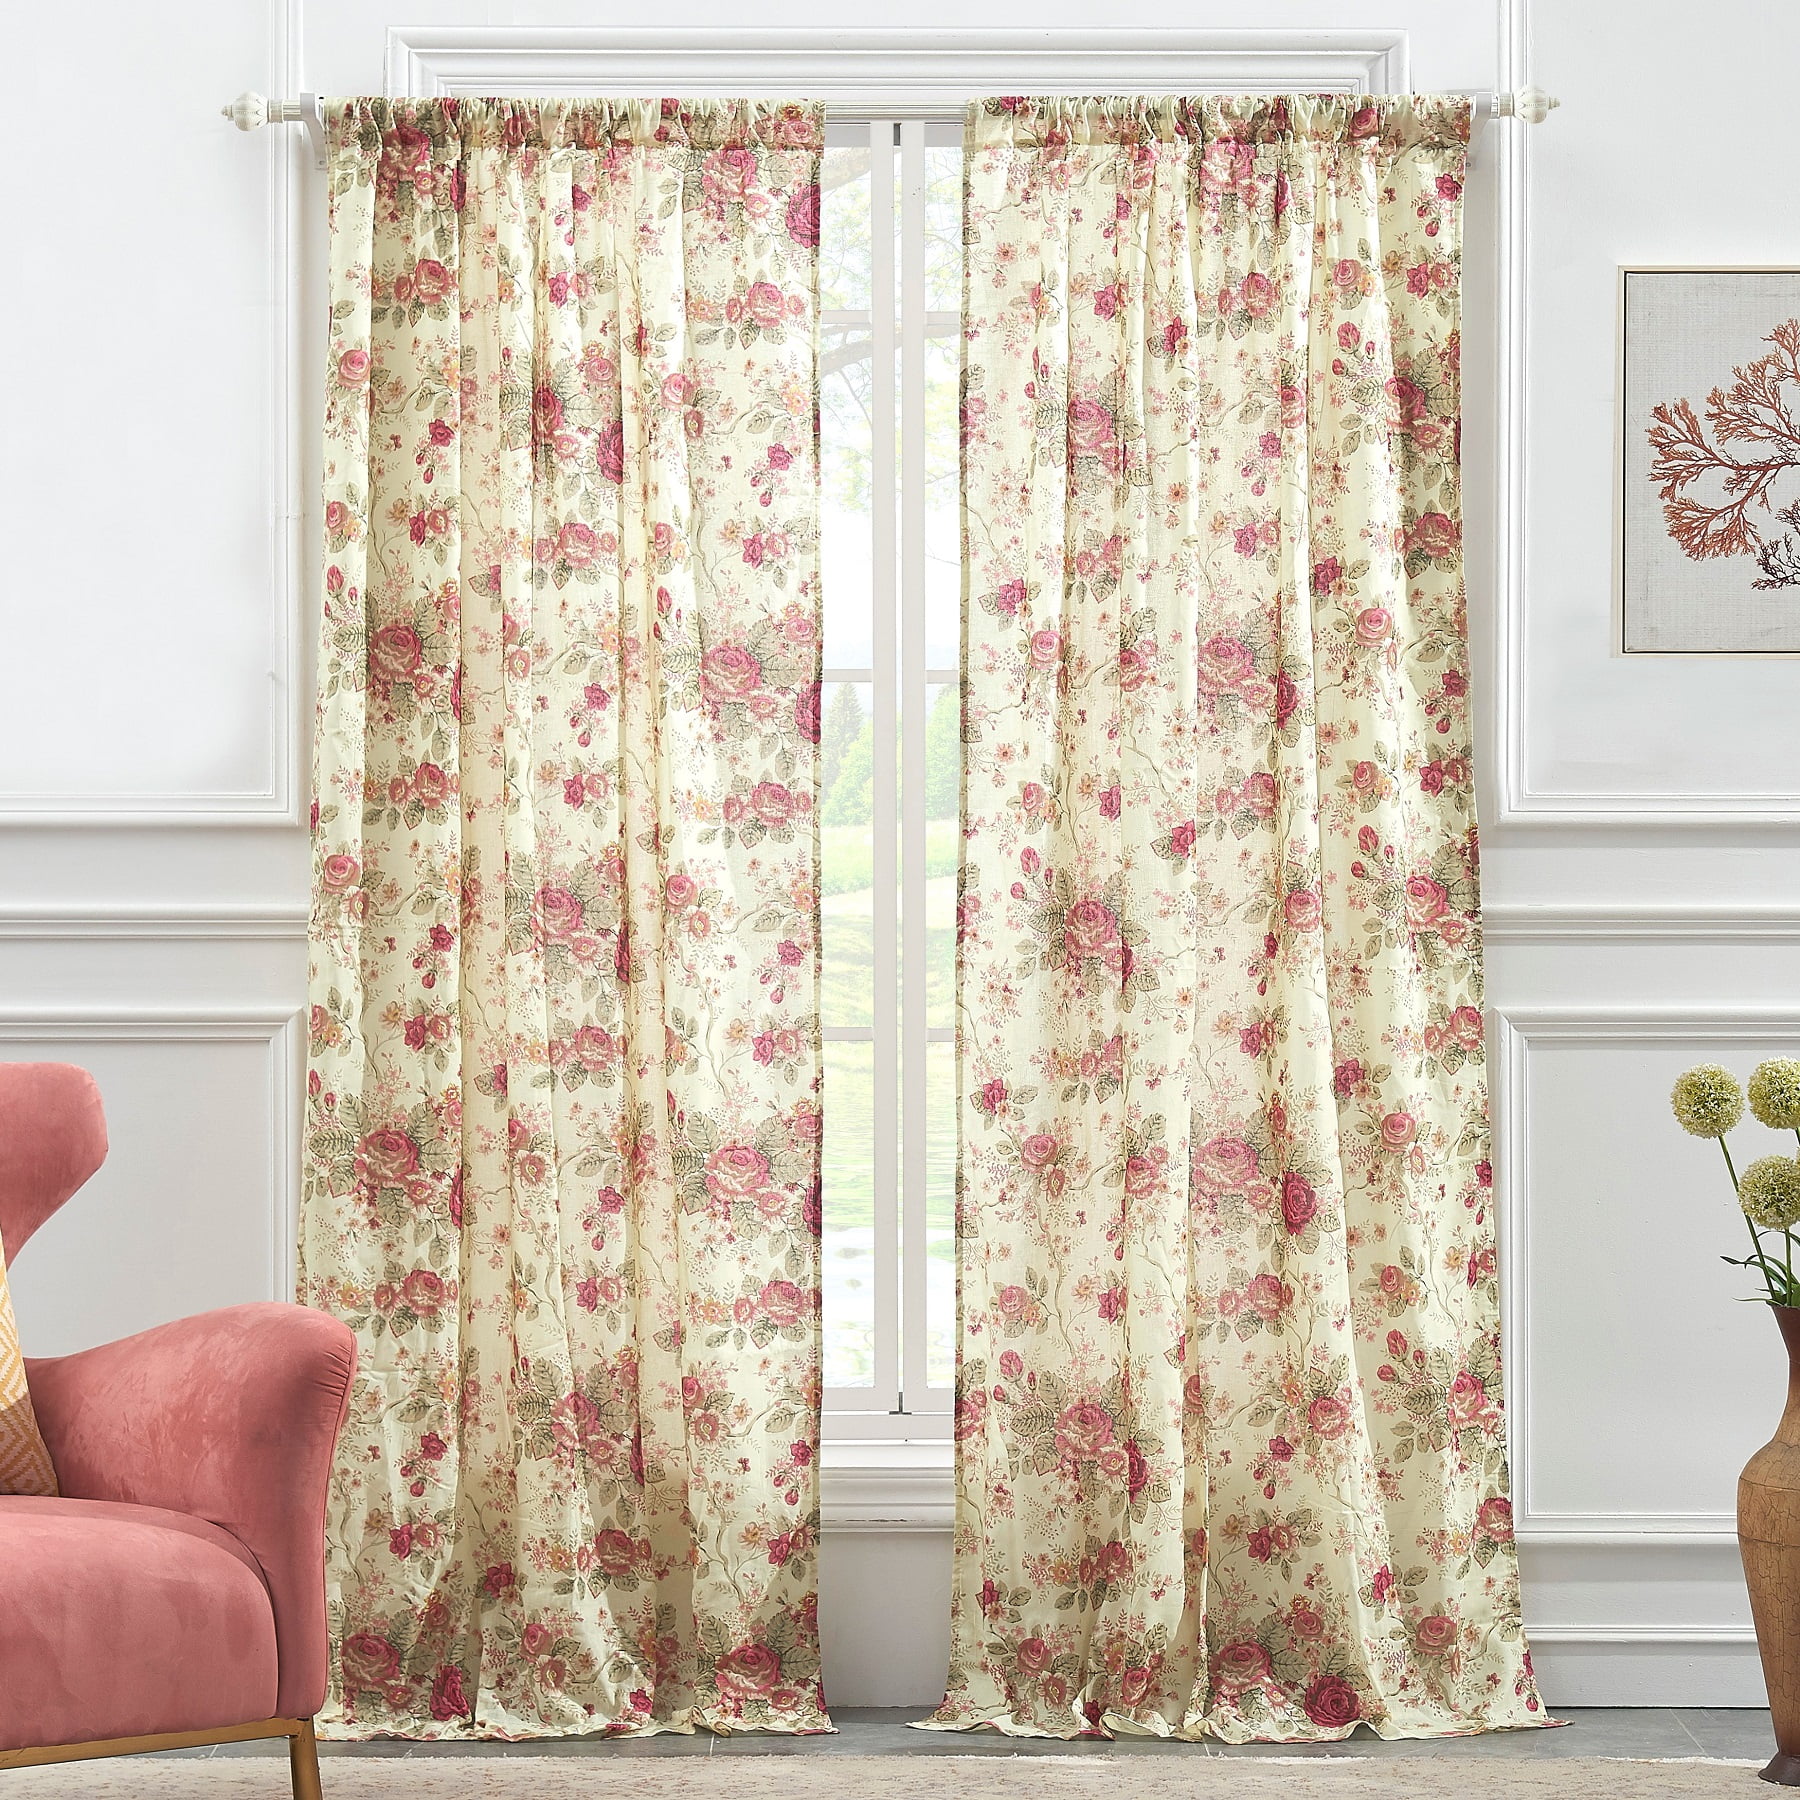 Global Drapes: Curtain Styles From Around The World